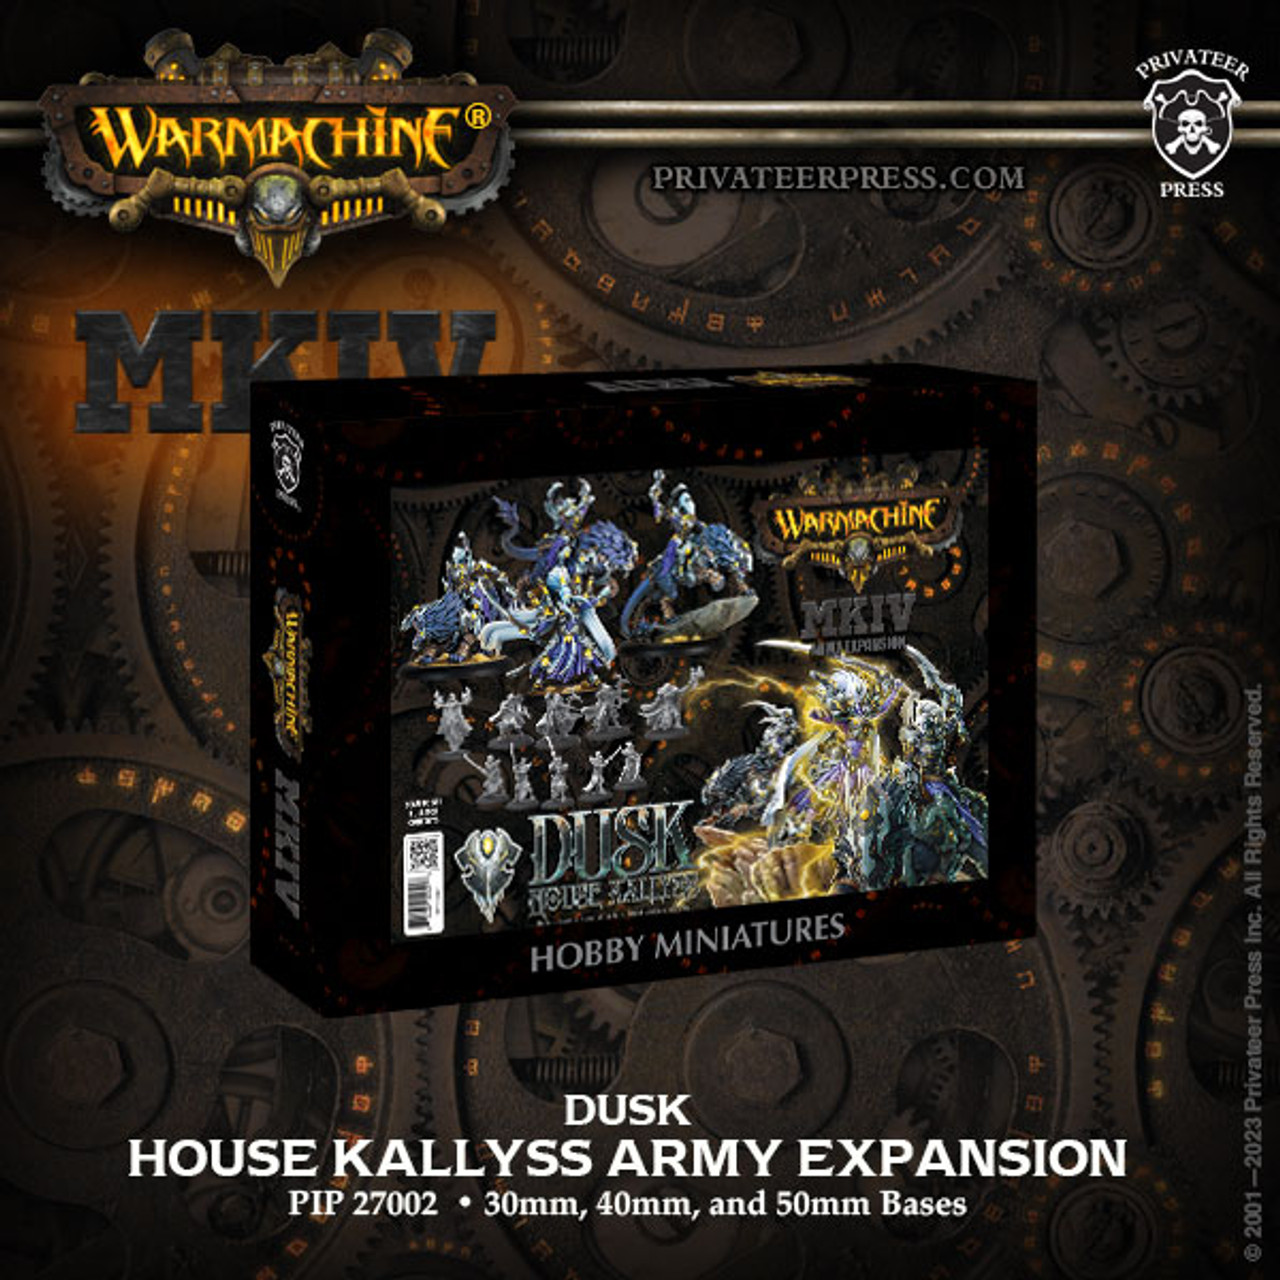 Dusk House Kallyss Army Expansion - Warmachine